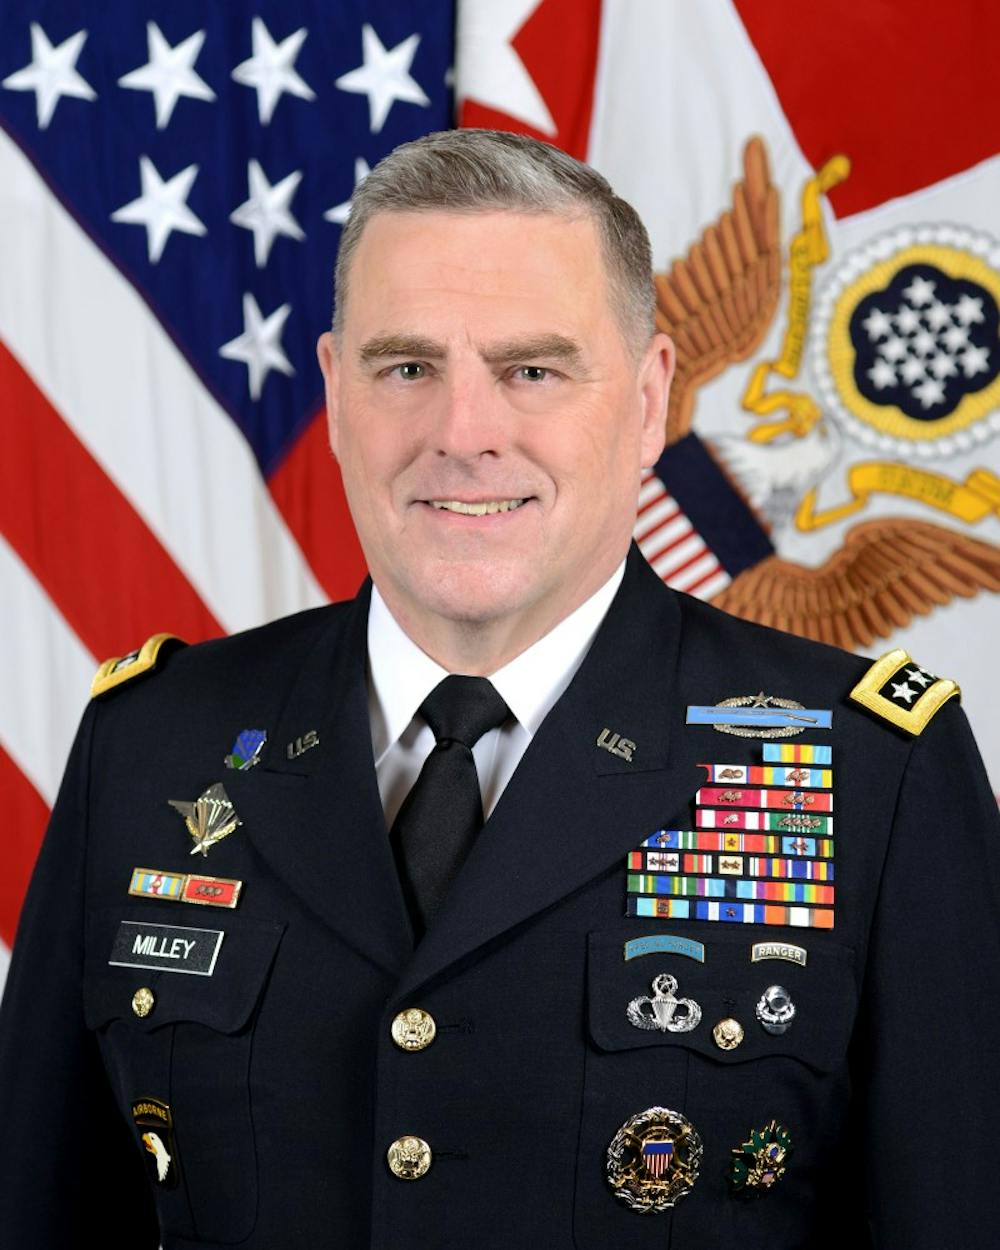 Milley nominated as chairman of the Joint Chiefs of Staff